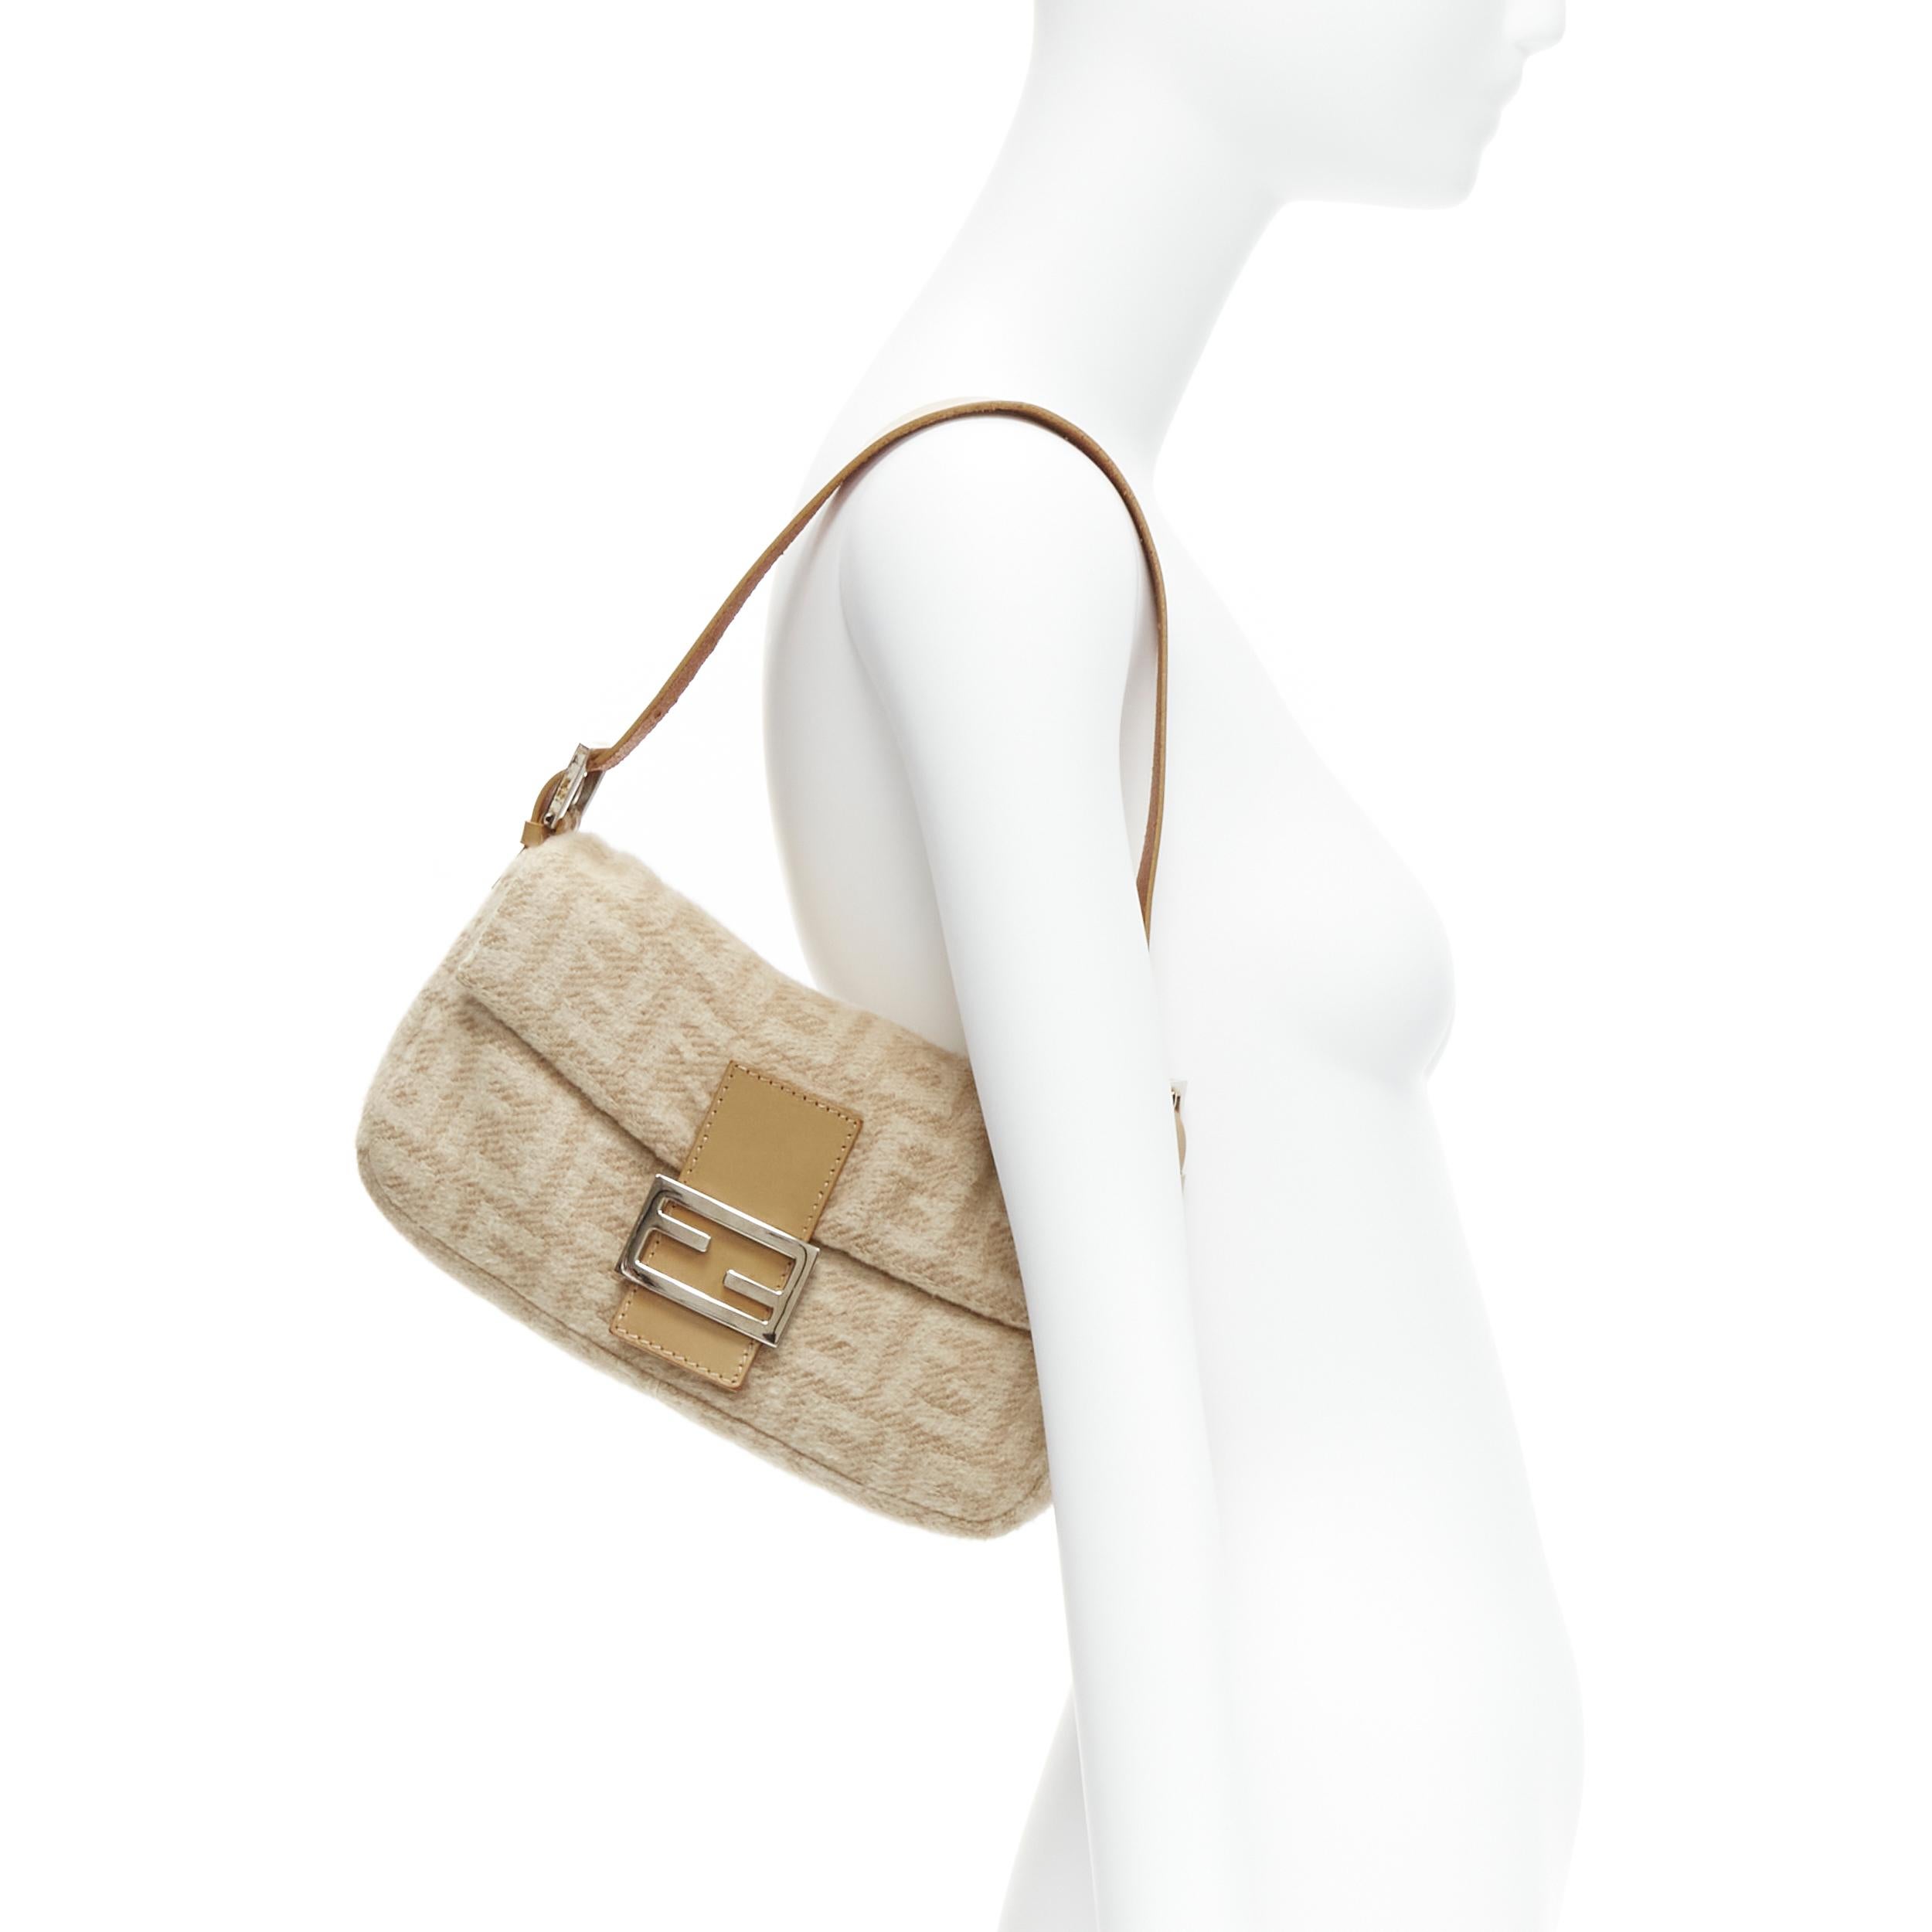 FENDI Baguette beige FF Zucca monogram wool leather top handle underarm bag
Reference: TGAS/C01996
Brand: Fendi
Model: Baguette
Material: Wool, Metal, Leather
Color: Beige, Brown
Pattern: Monogram
Closure: Snap Buttons
Lining: Brown Leather
Made in: